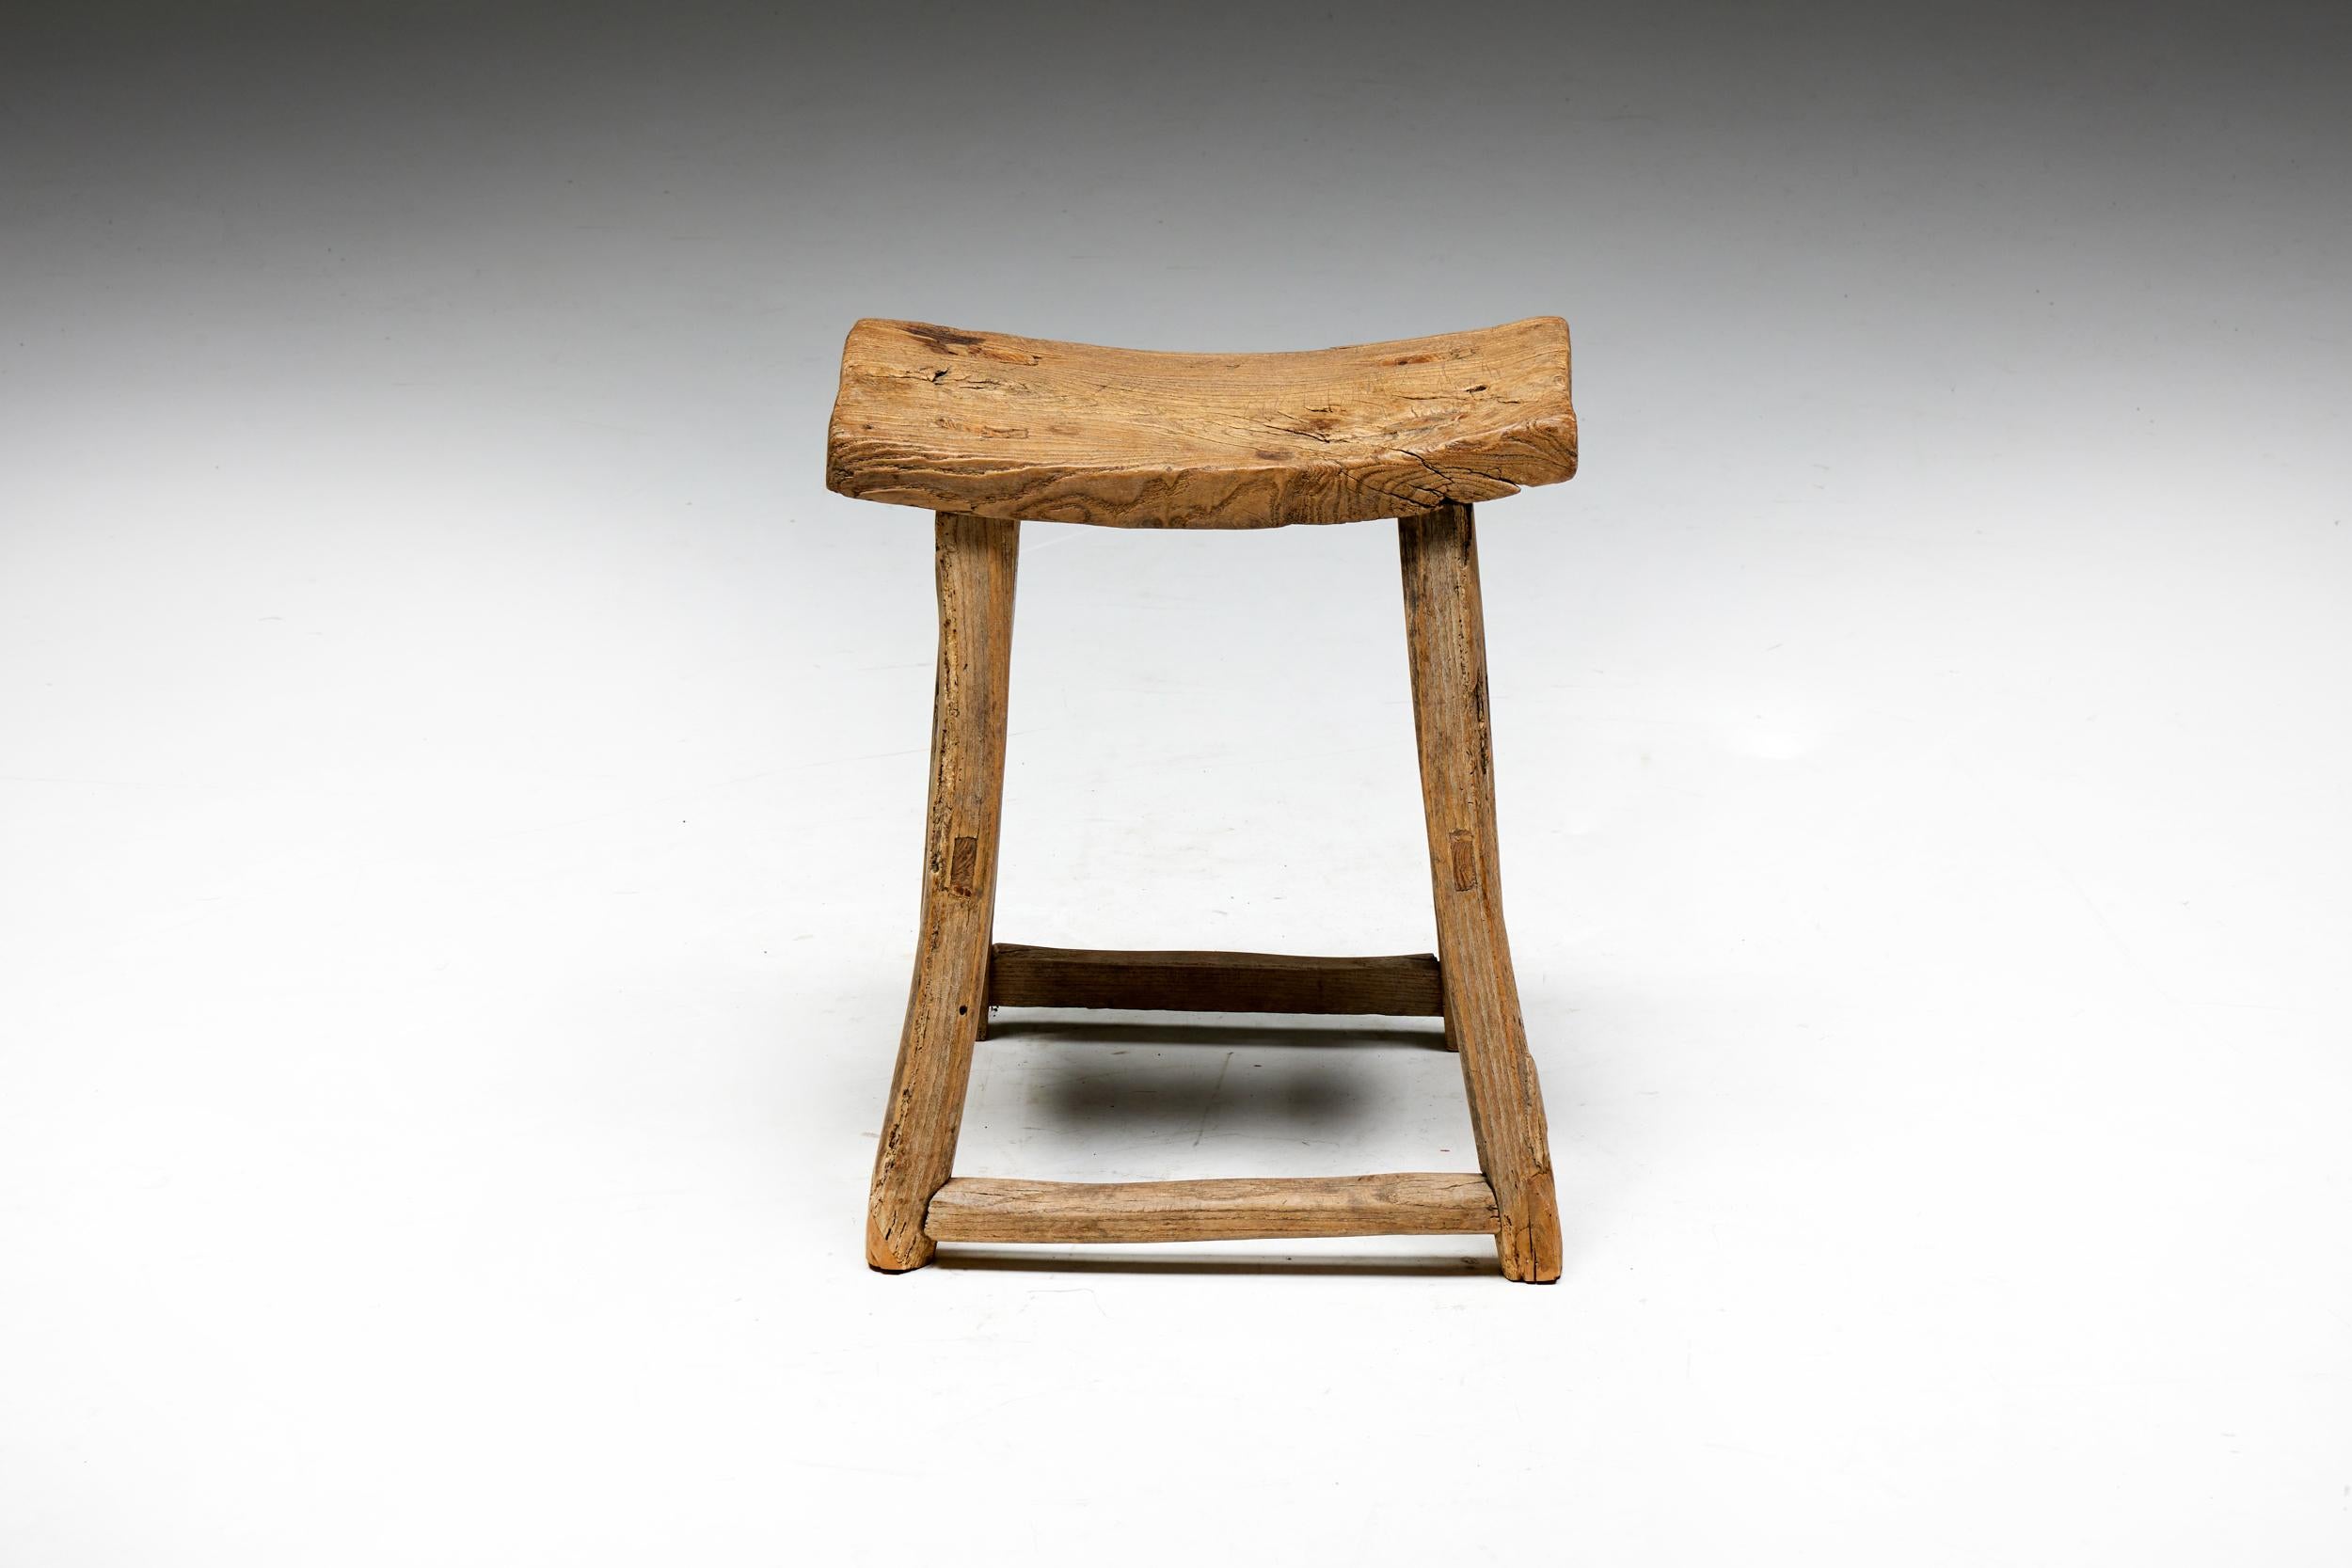 Wood Rustic Folk Art Stool, France, Early 20th Century For Sale